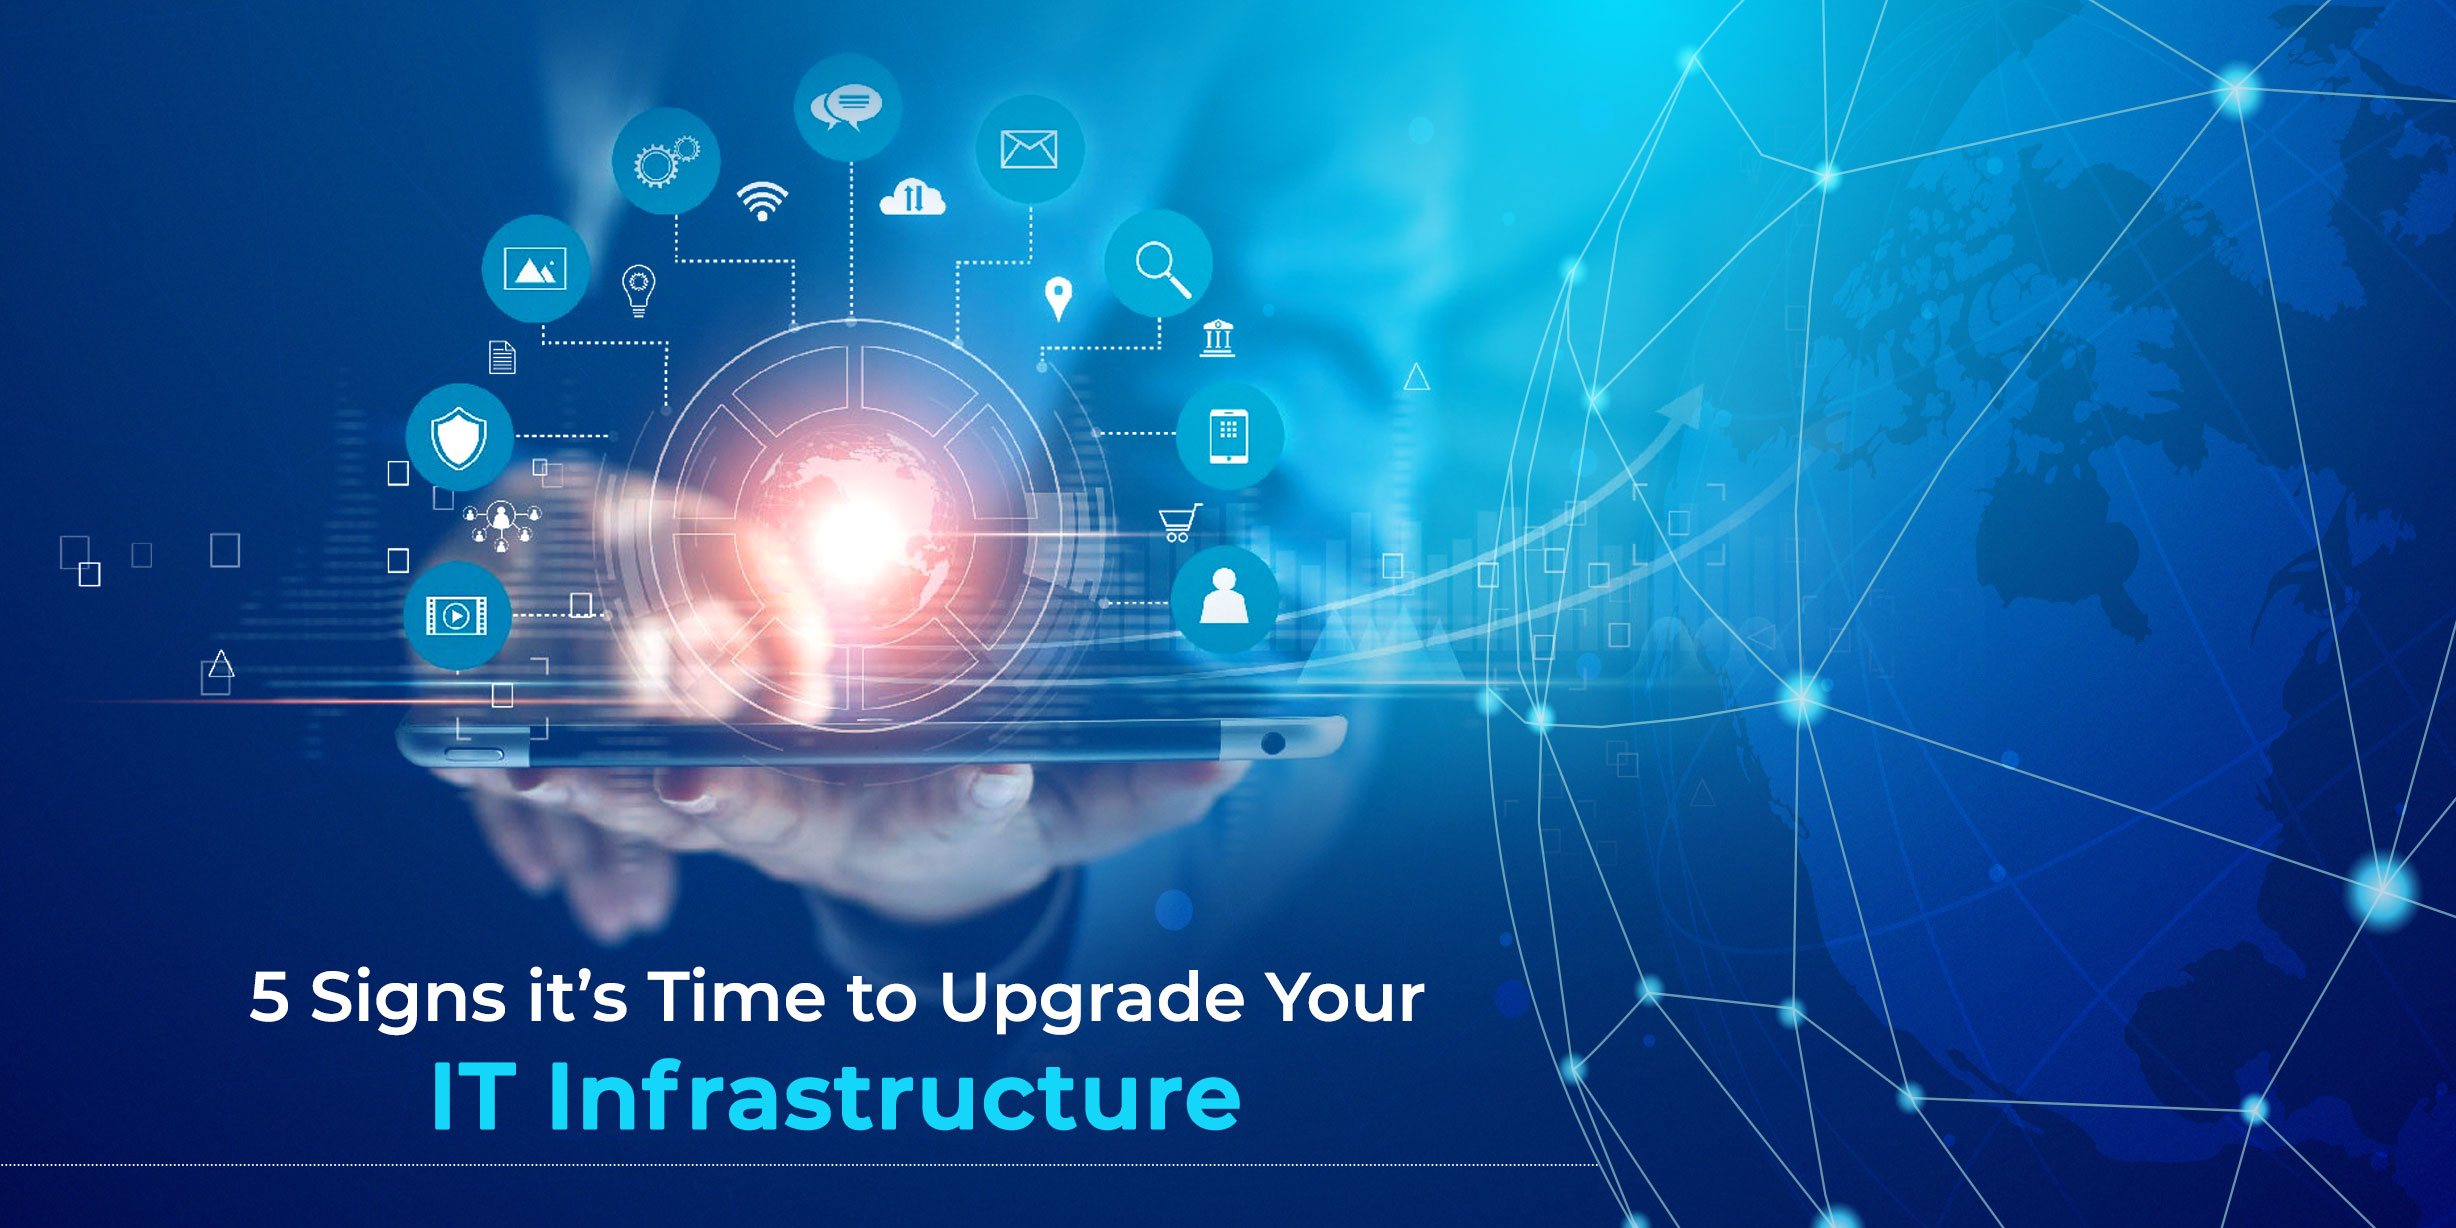 5 Signs it's Time to Upgrade Your IT Infrastructure